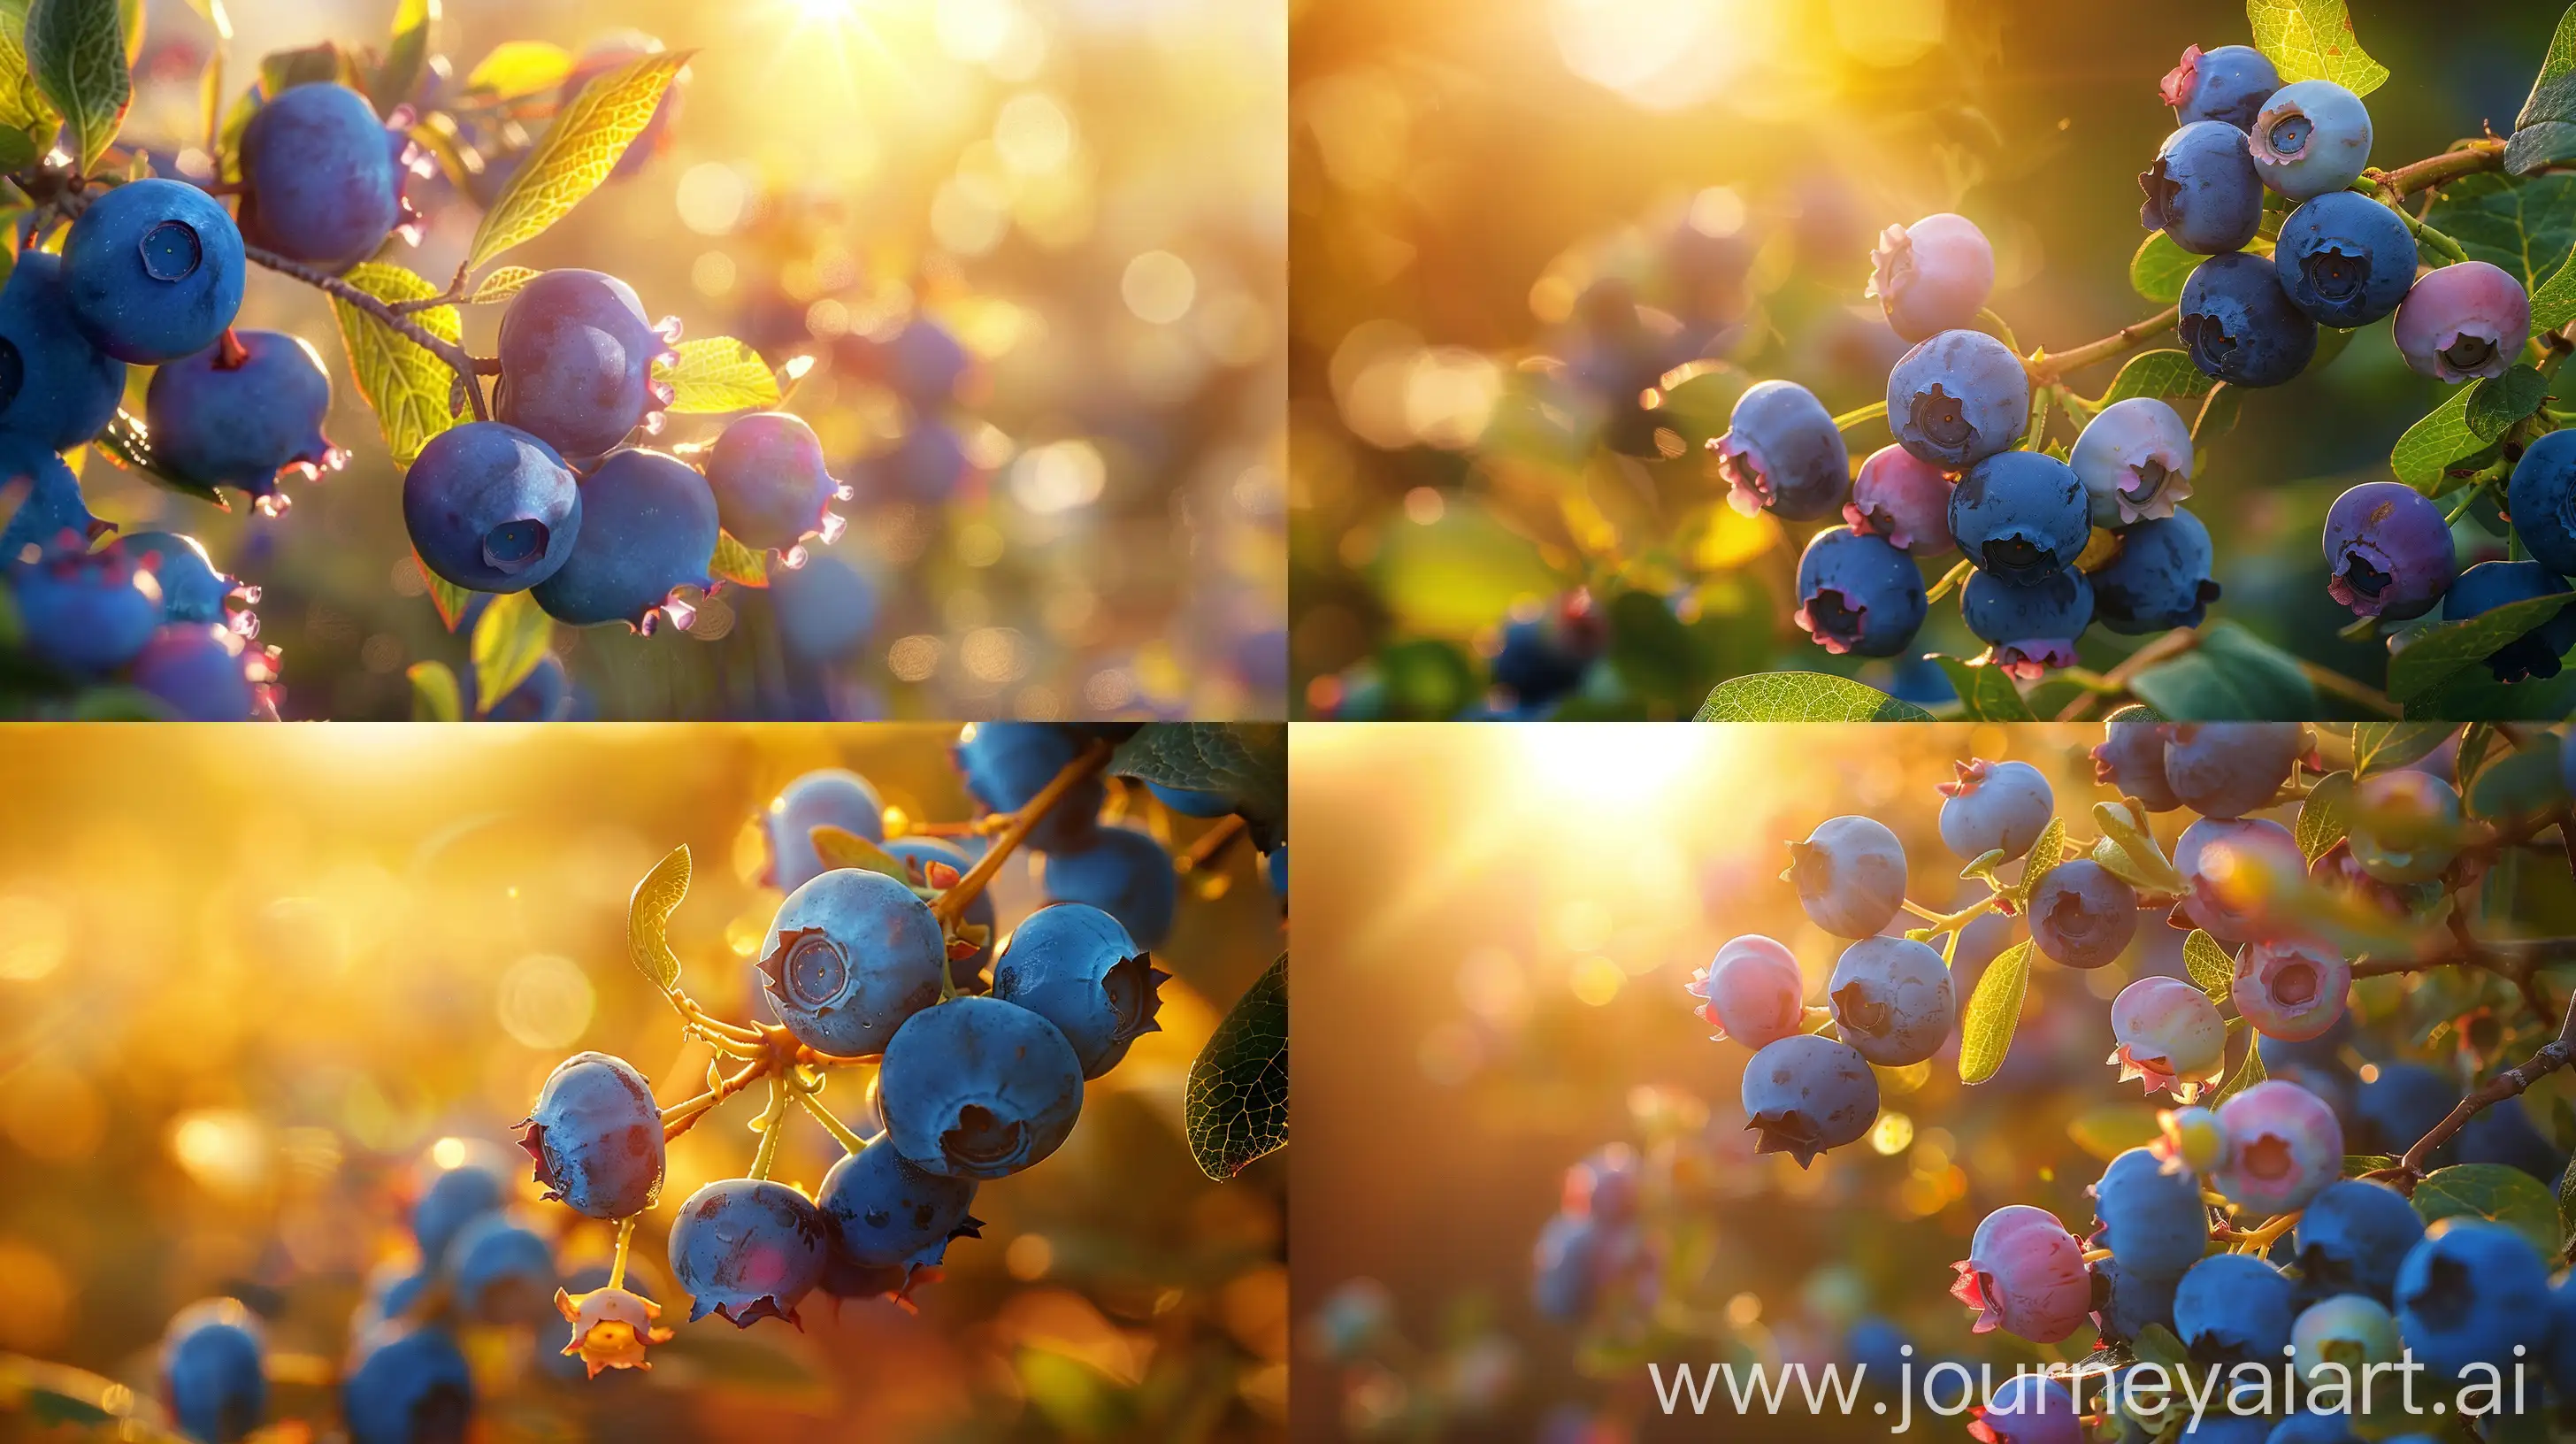 Golden-Sunlit-Blueberry-Collection-Coville-Bluejay-Blueray-Herbert